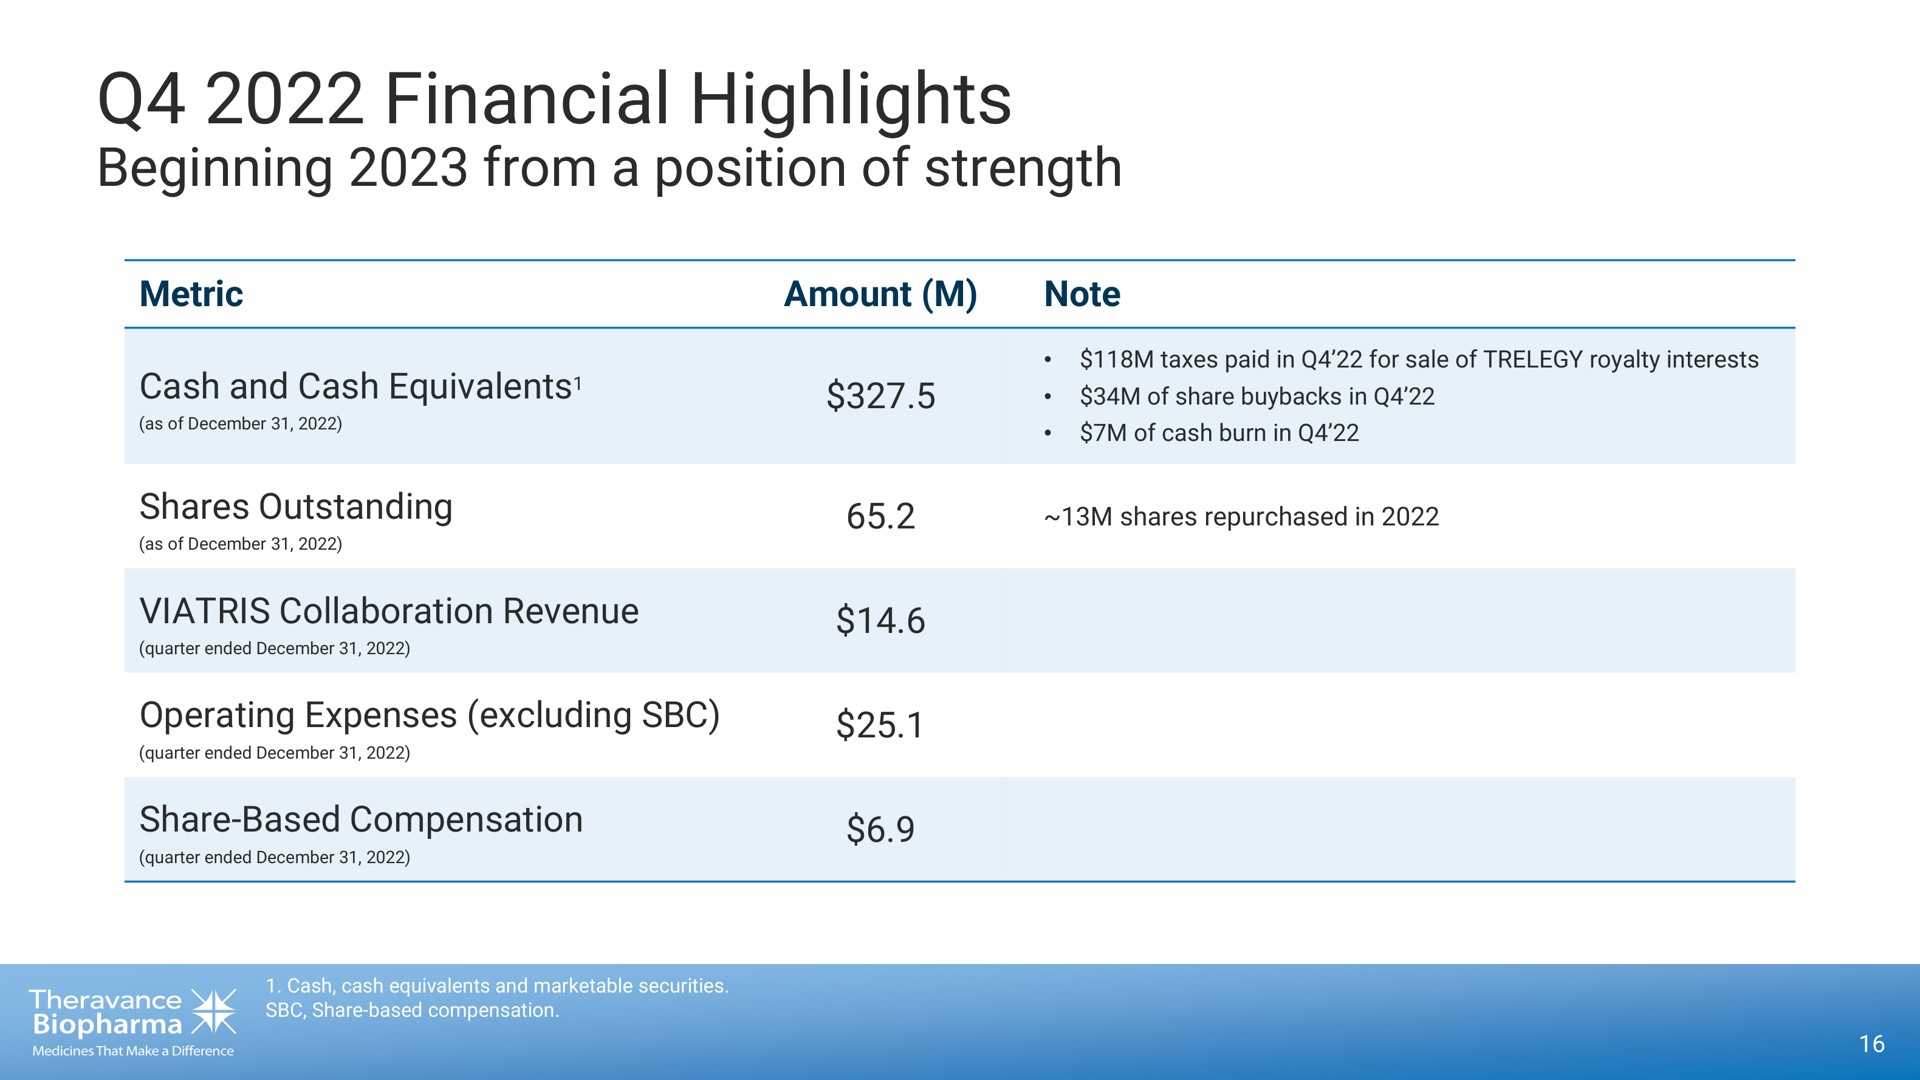 financial highlights beginning from a position of strength | Theravance Biopharma